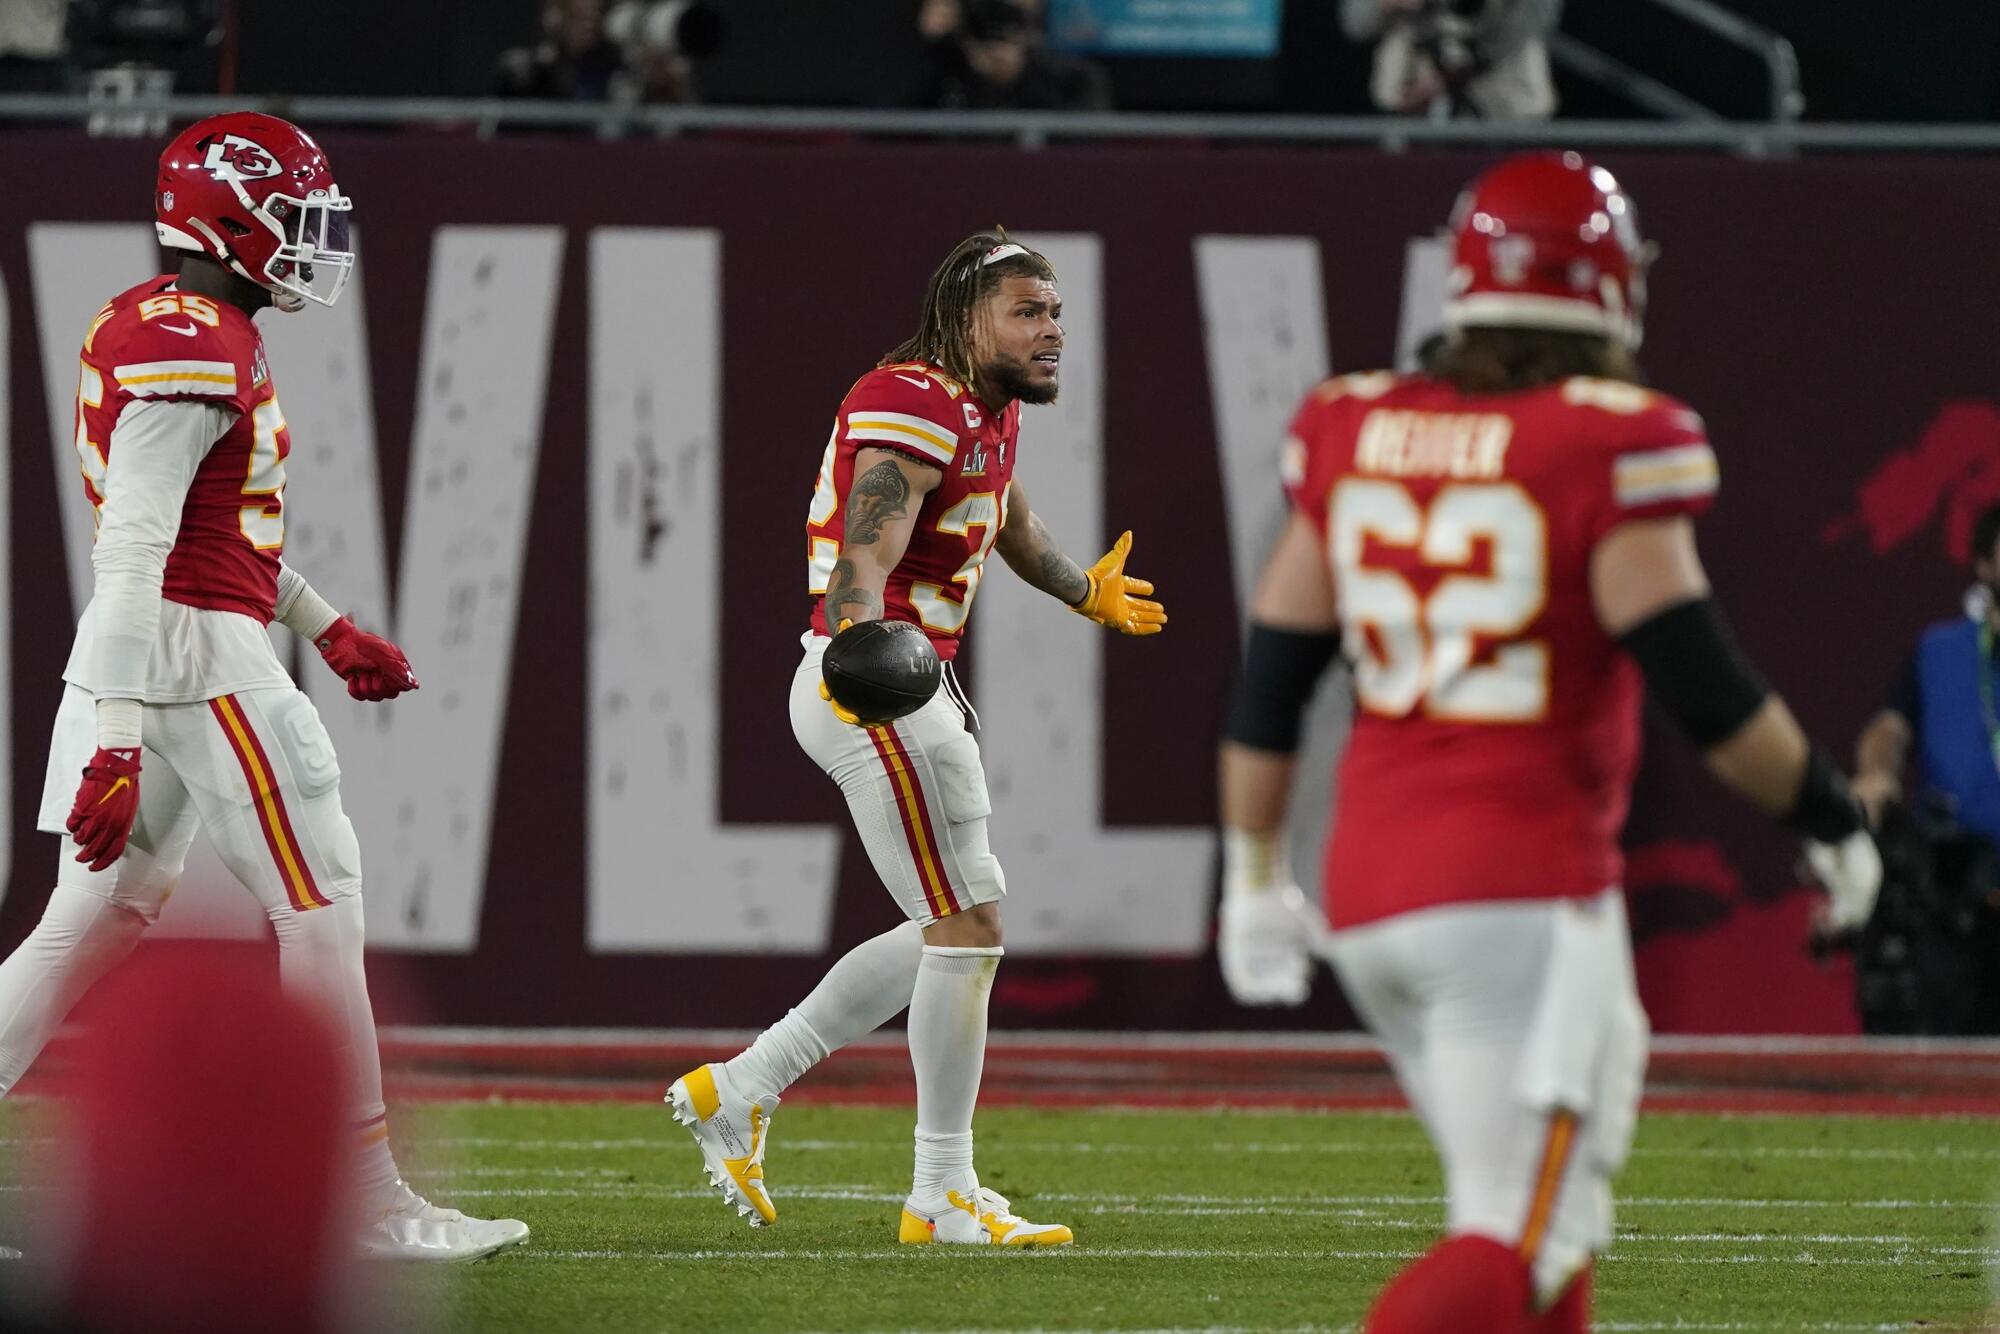 Kansas City Chiefs safety Tyrann Mathieu reacts after an interception was called back for a penalty.